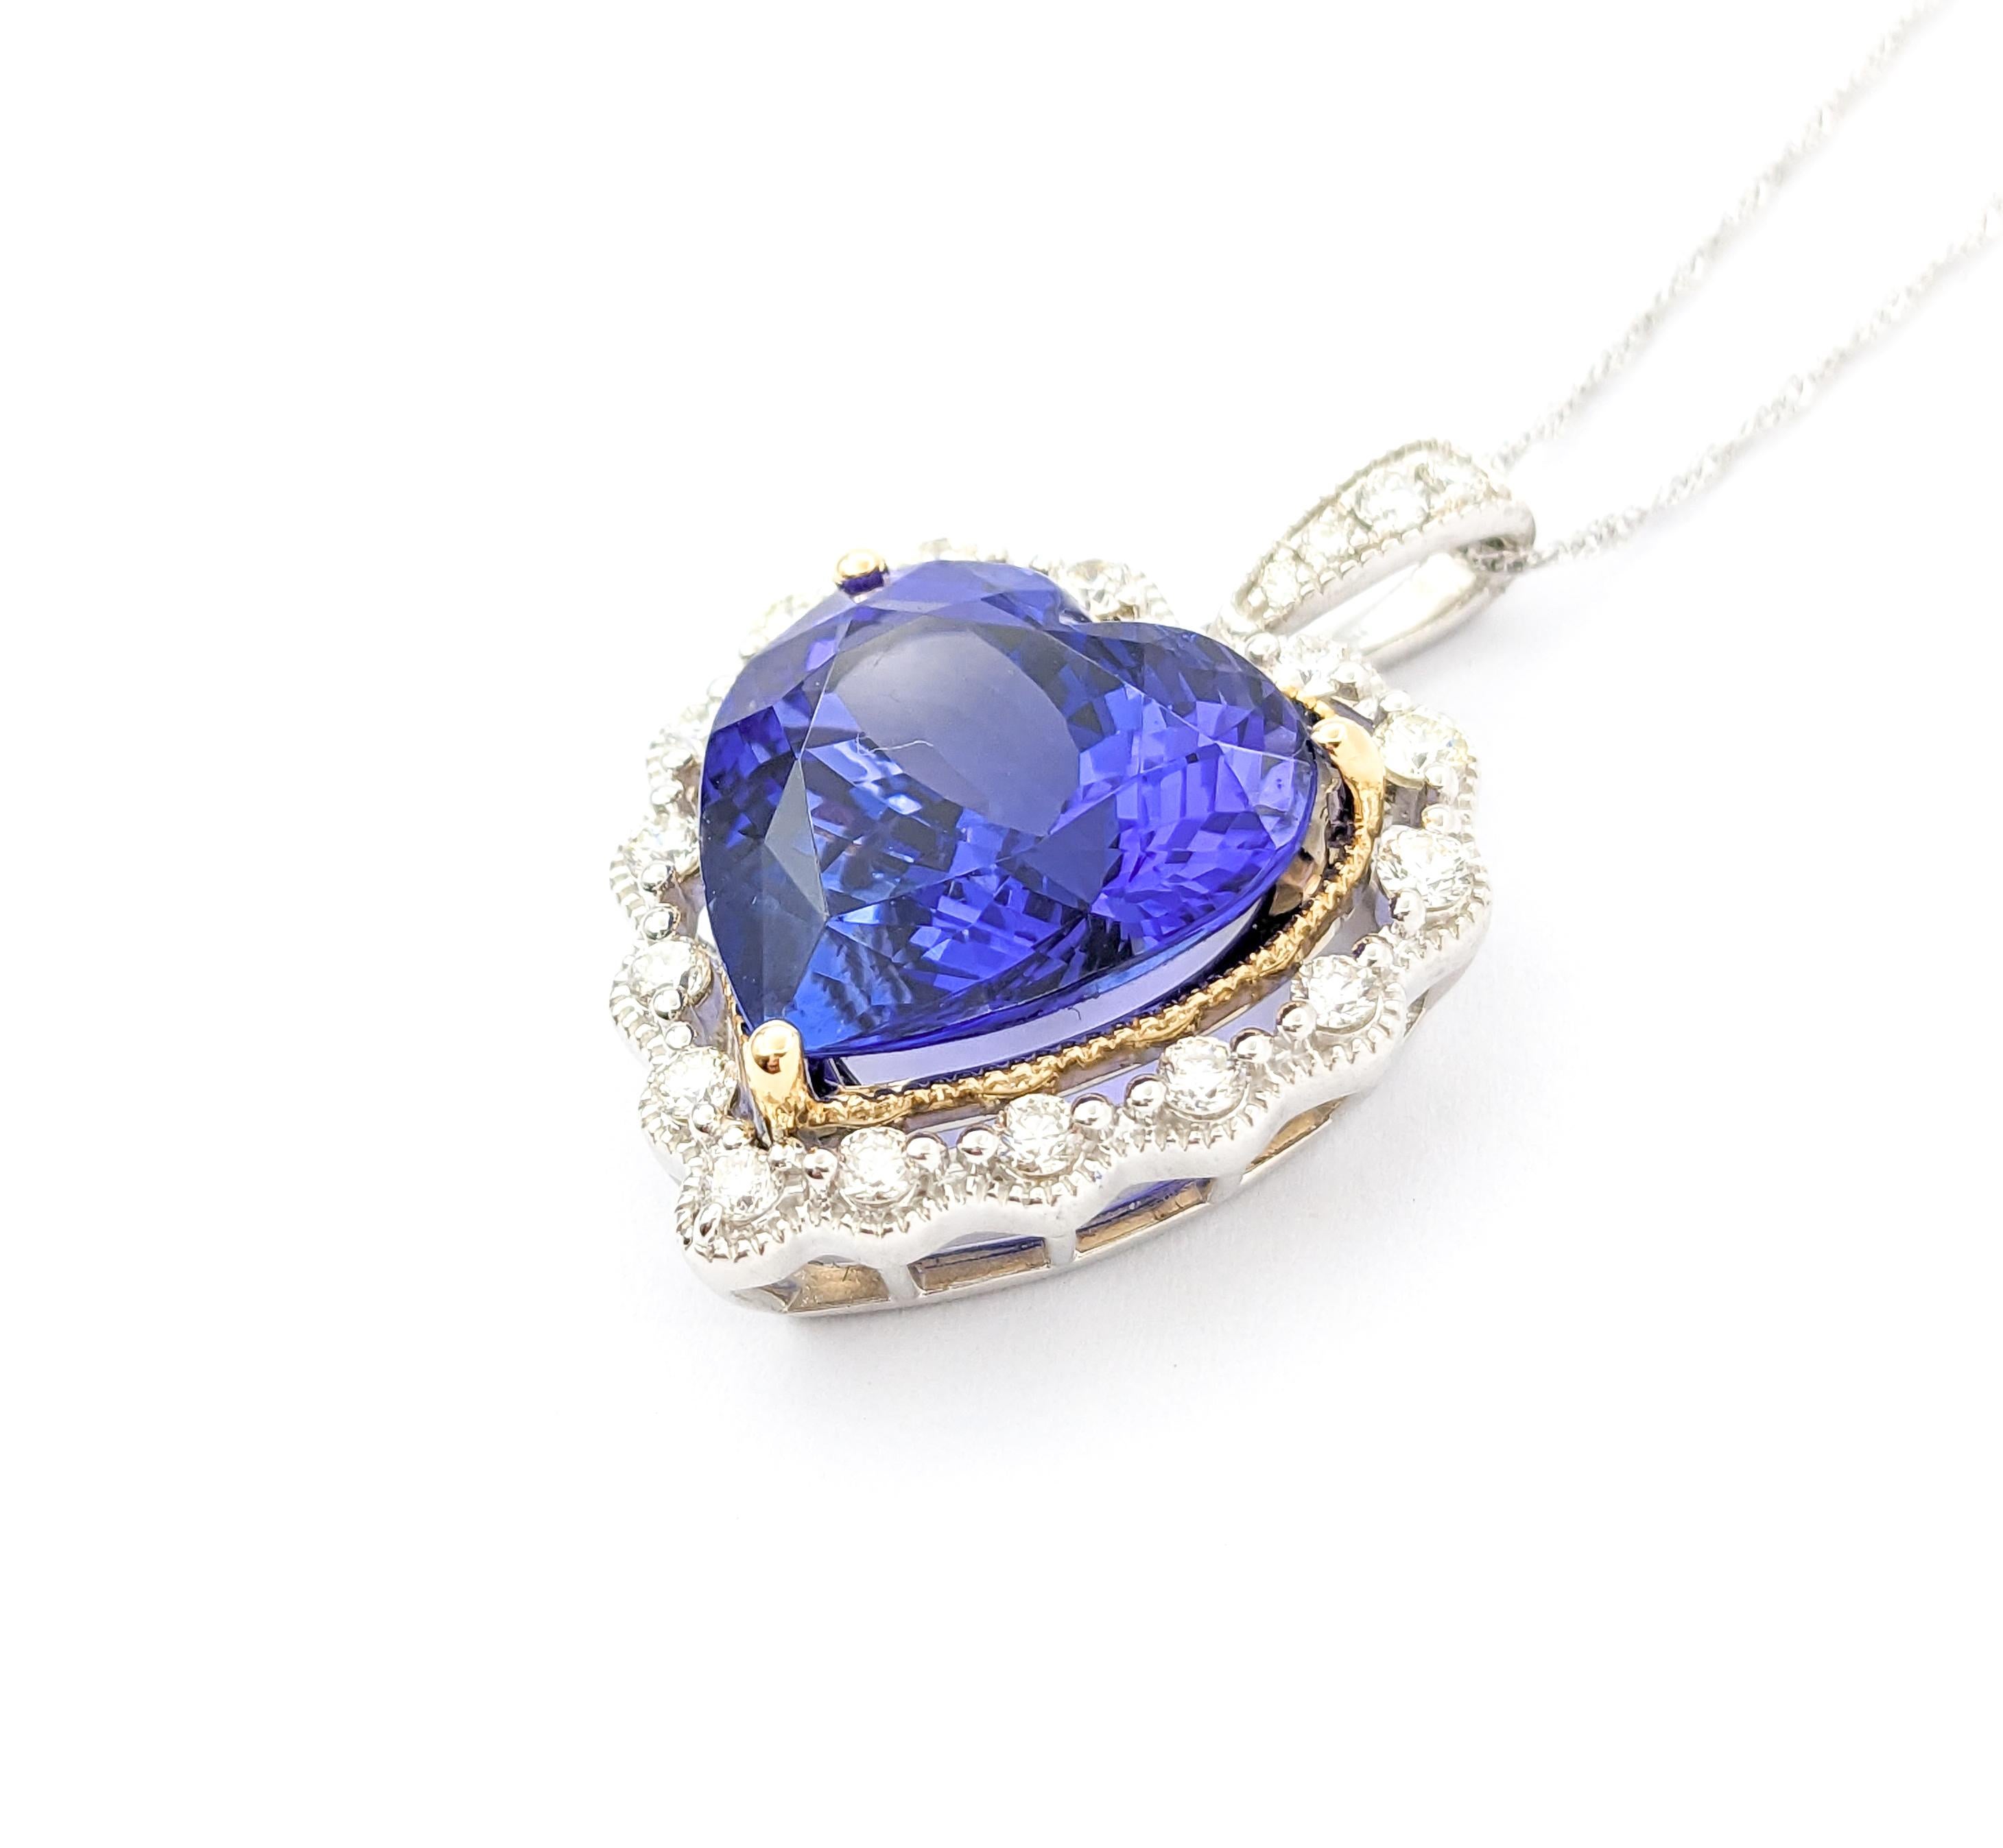 10.6ct Tanzanite Pendant With Diamond Halo In Two Tone Gold In Excellent Condition For Sale In Bloomington, MN